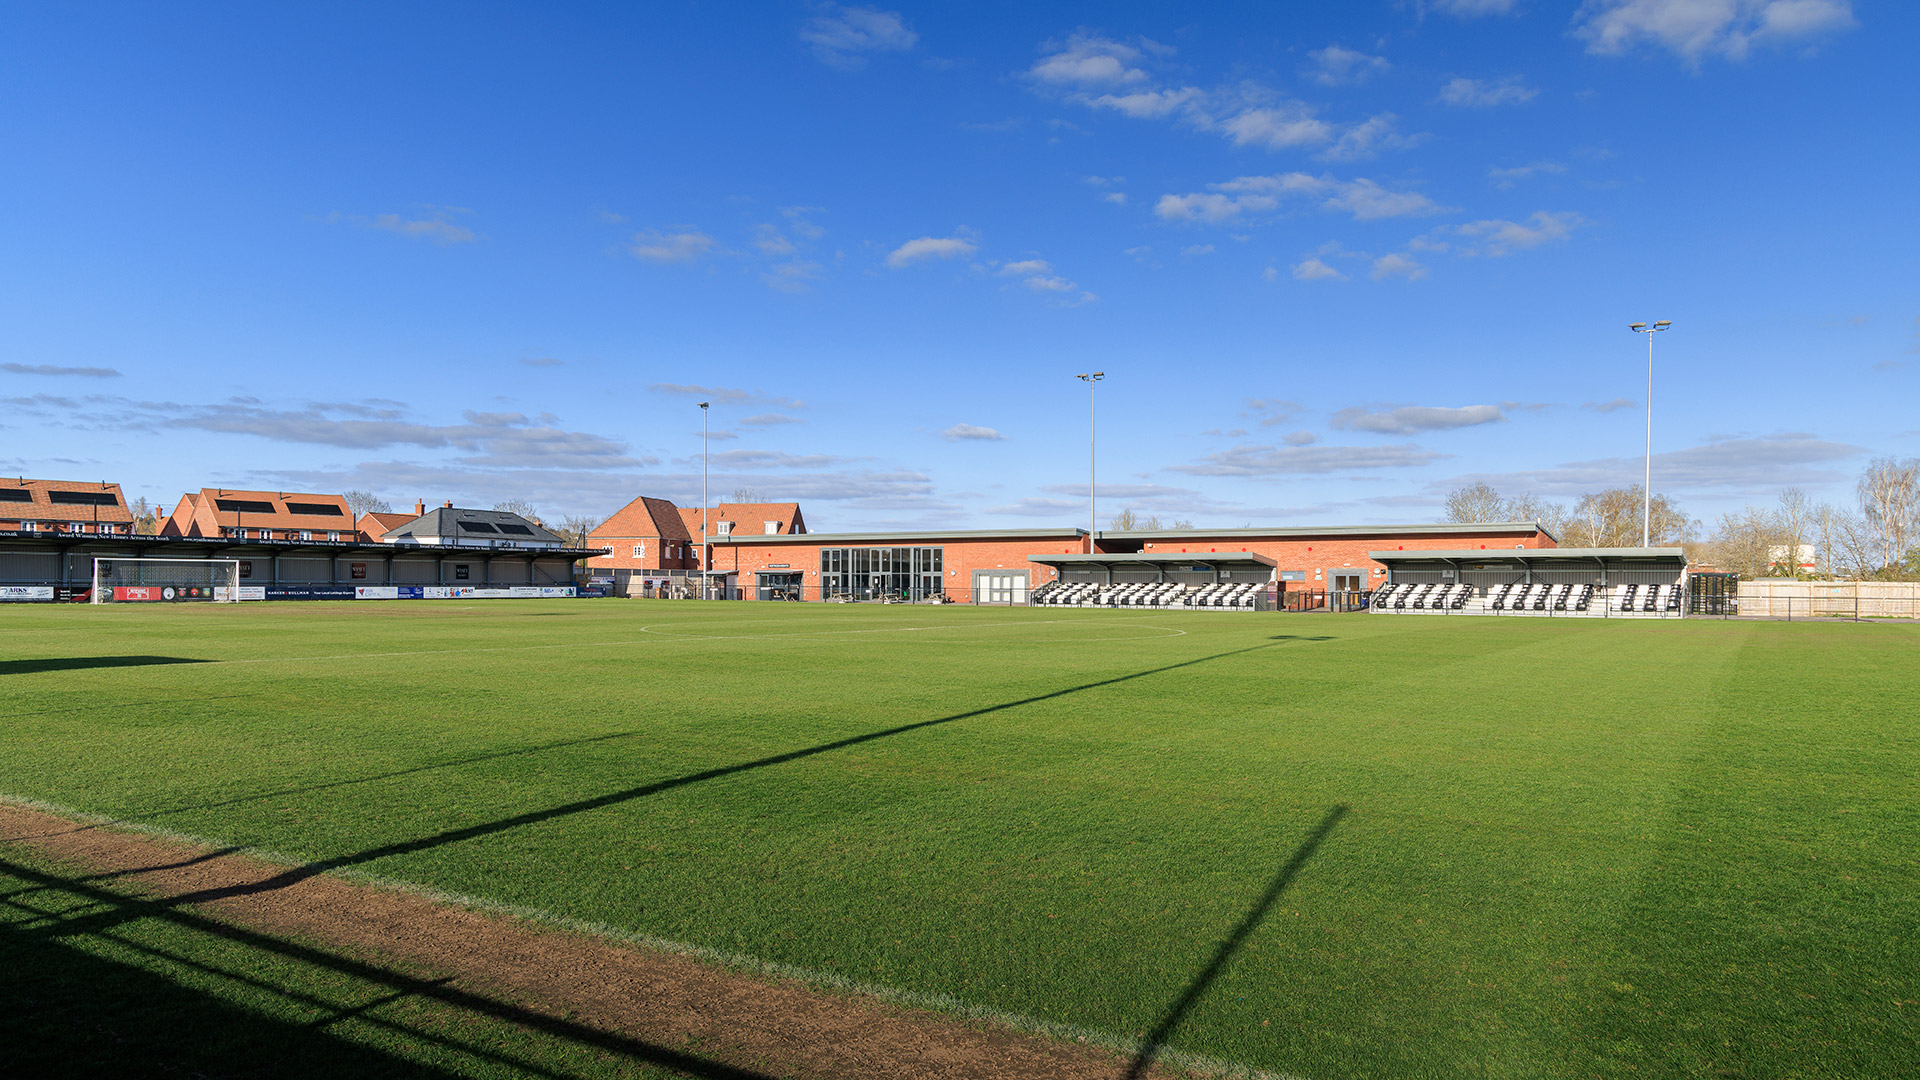 football pitch with clubhouse and supporters stands in background